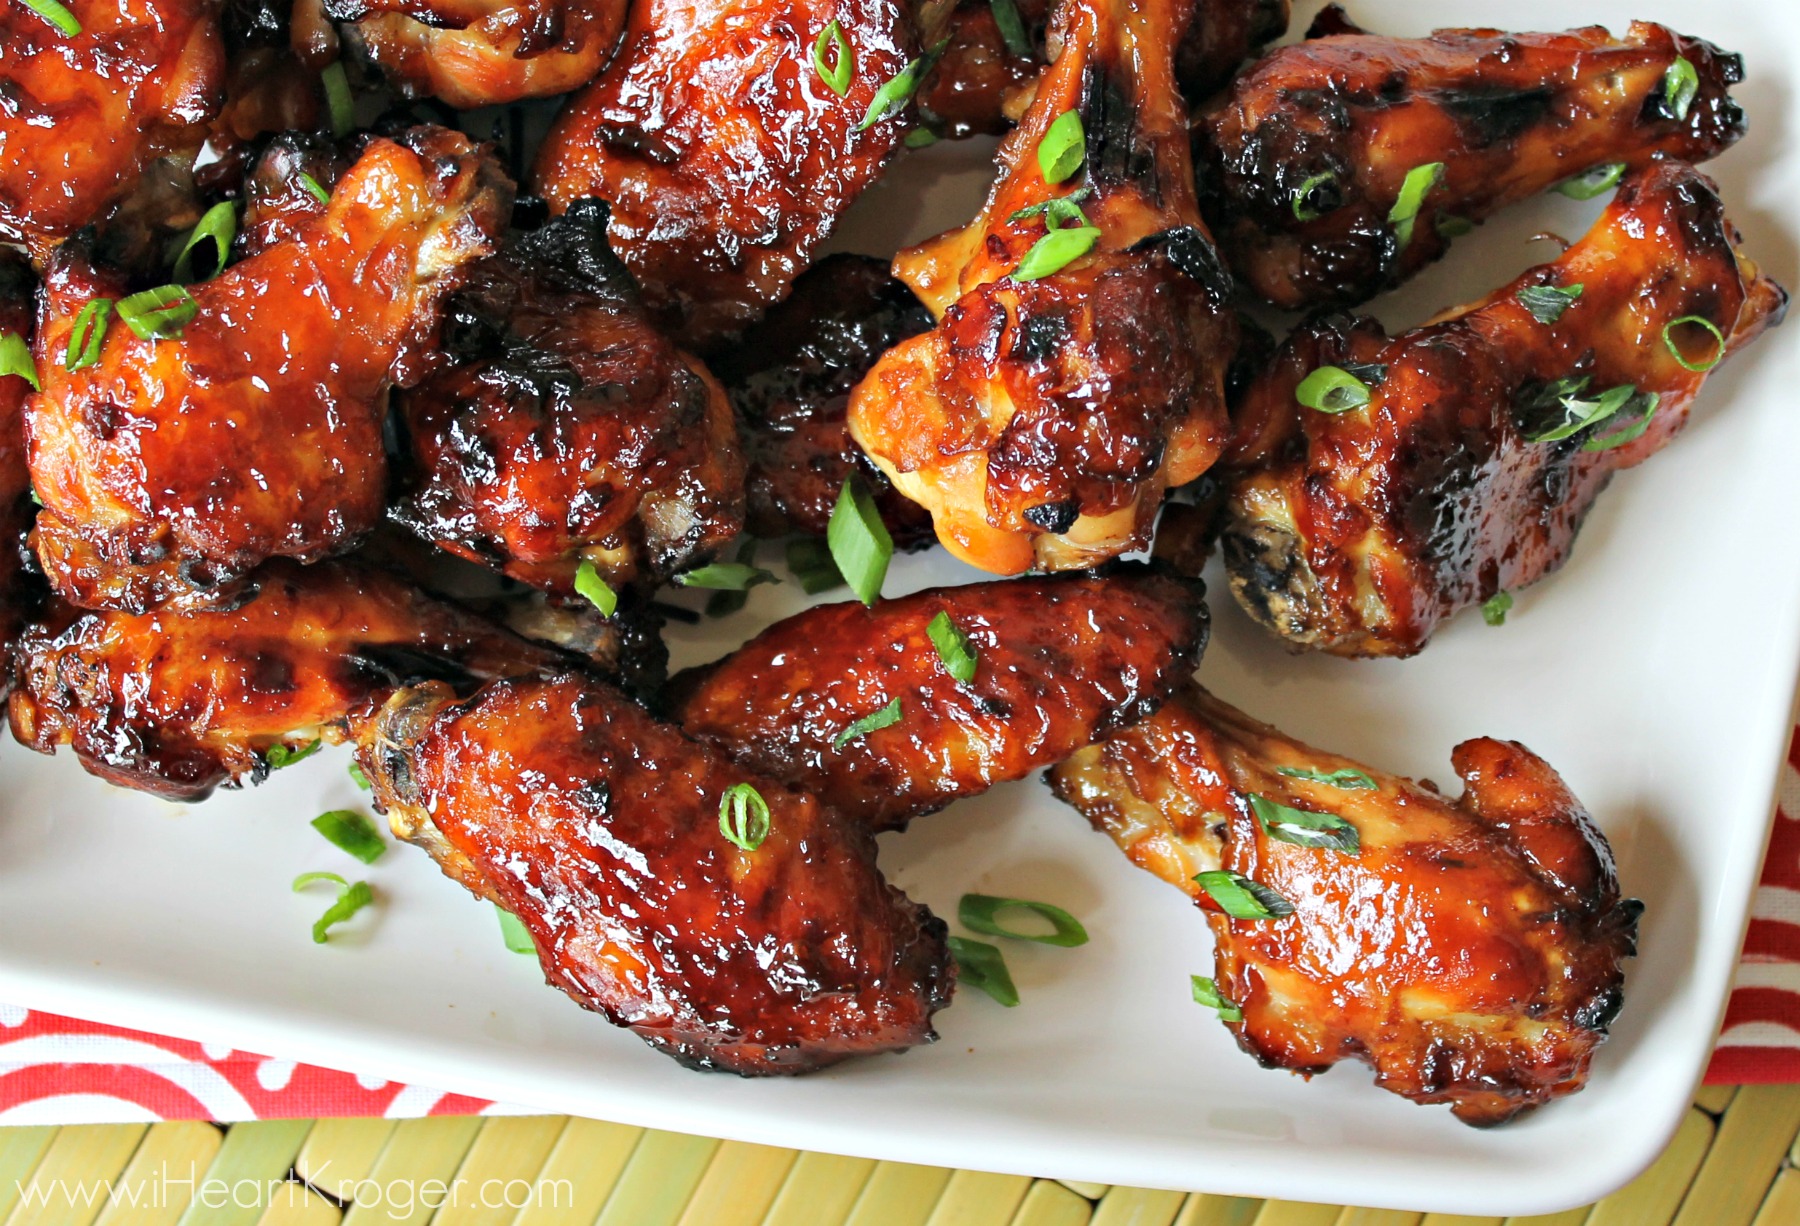 Heritage Farm Chicken Party Wings Just $5.99 Per Bag (Regular Price $13.99)